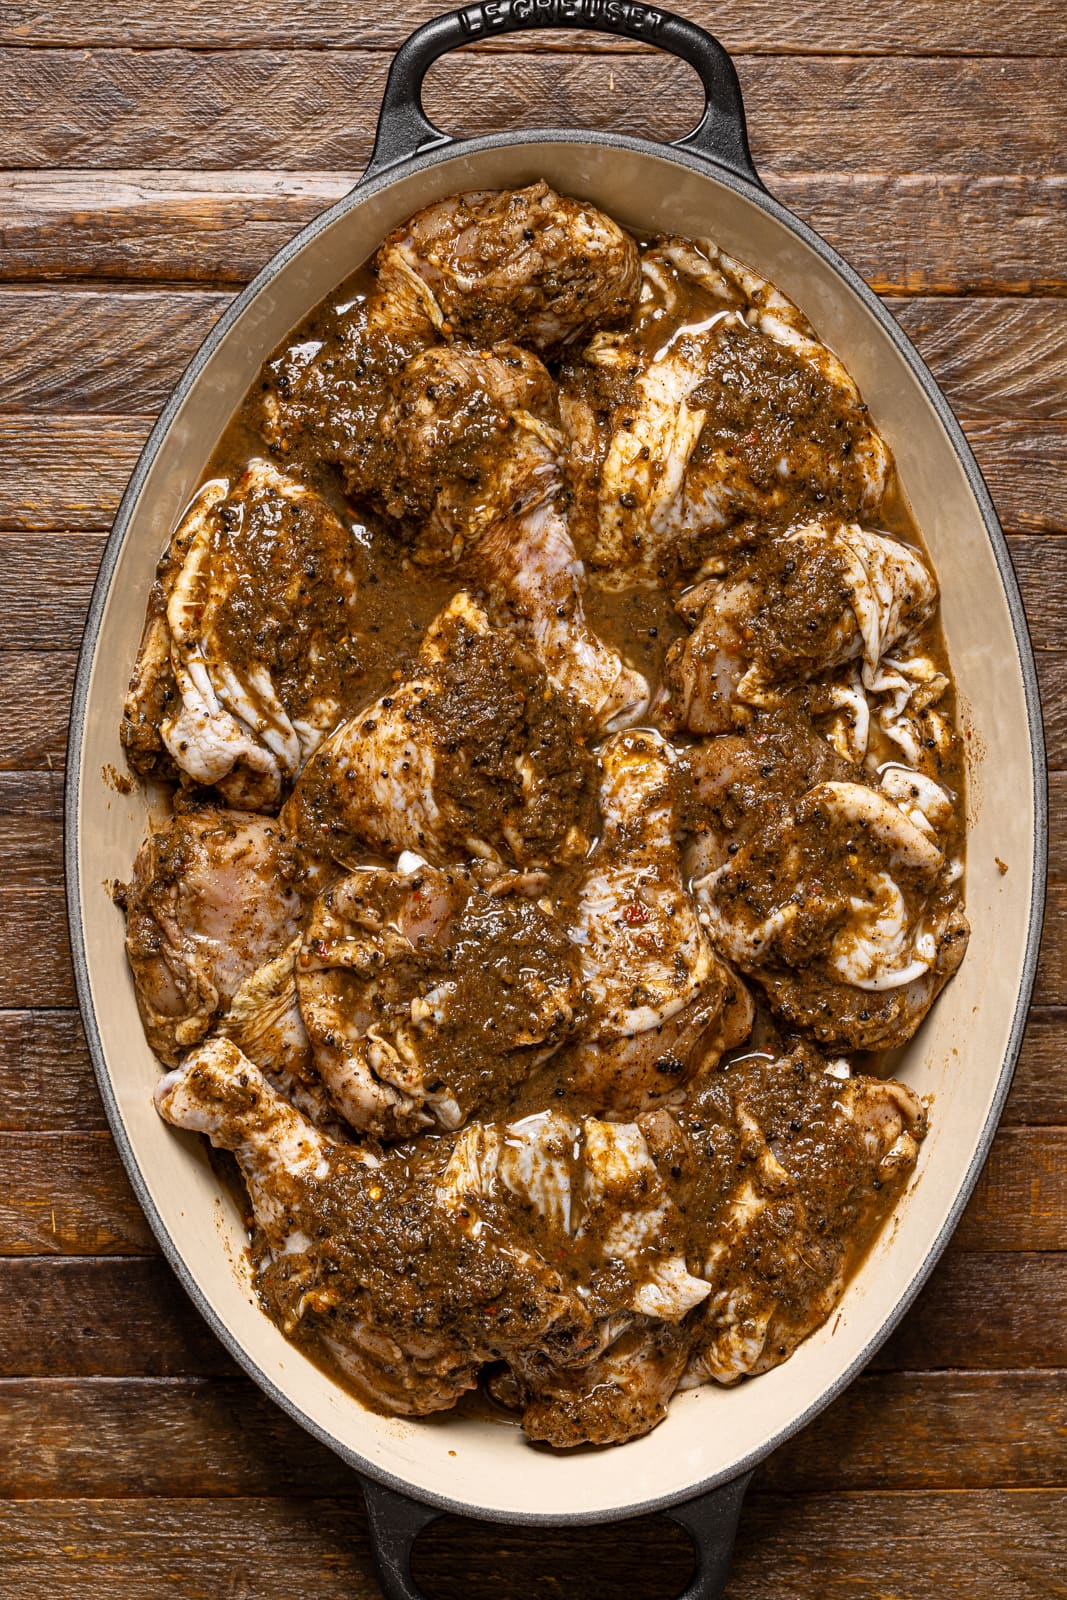 Marinated chicken lined in a baking dish on a brown wood table.